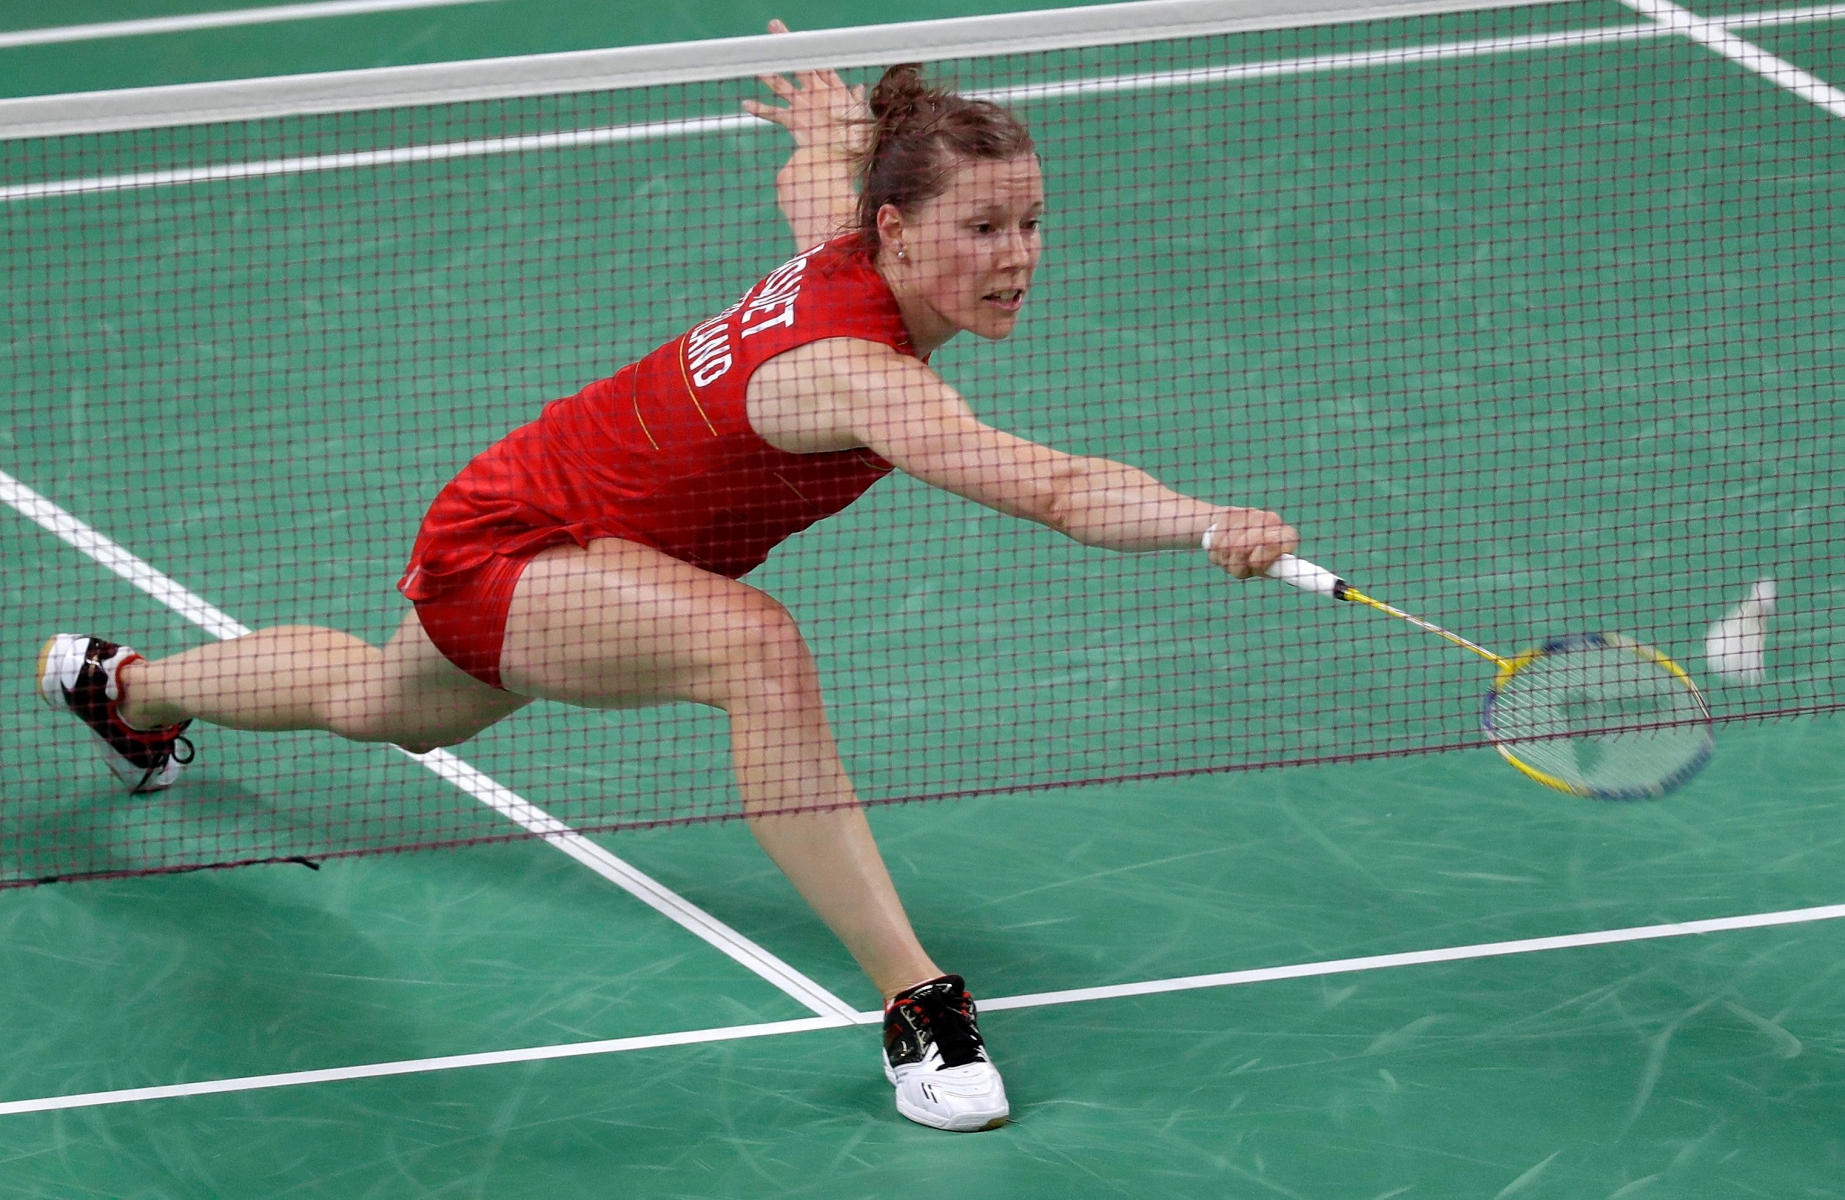 Switzerland's Sabrina Jaquet plays against Britain's Kirsty Gilmour during a women's singles match at the 2016 Summer Olympics in Rio de Janeiro, Brazil, Thursday, Aug. 11, 2016. (AP Photo/Kin Cheung) Rio Olympics Badminton